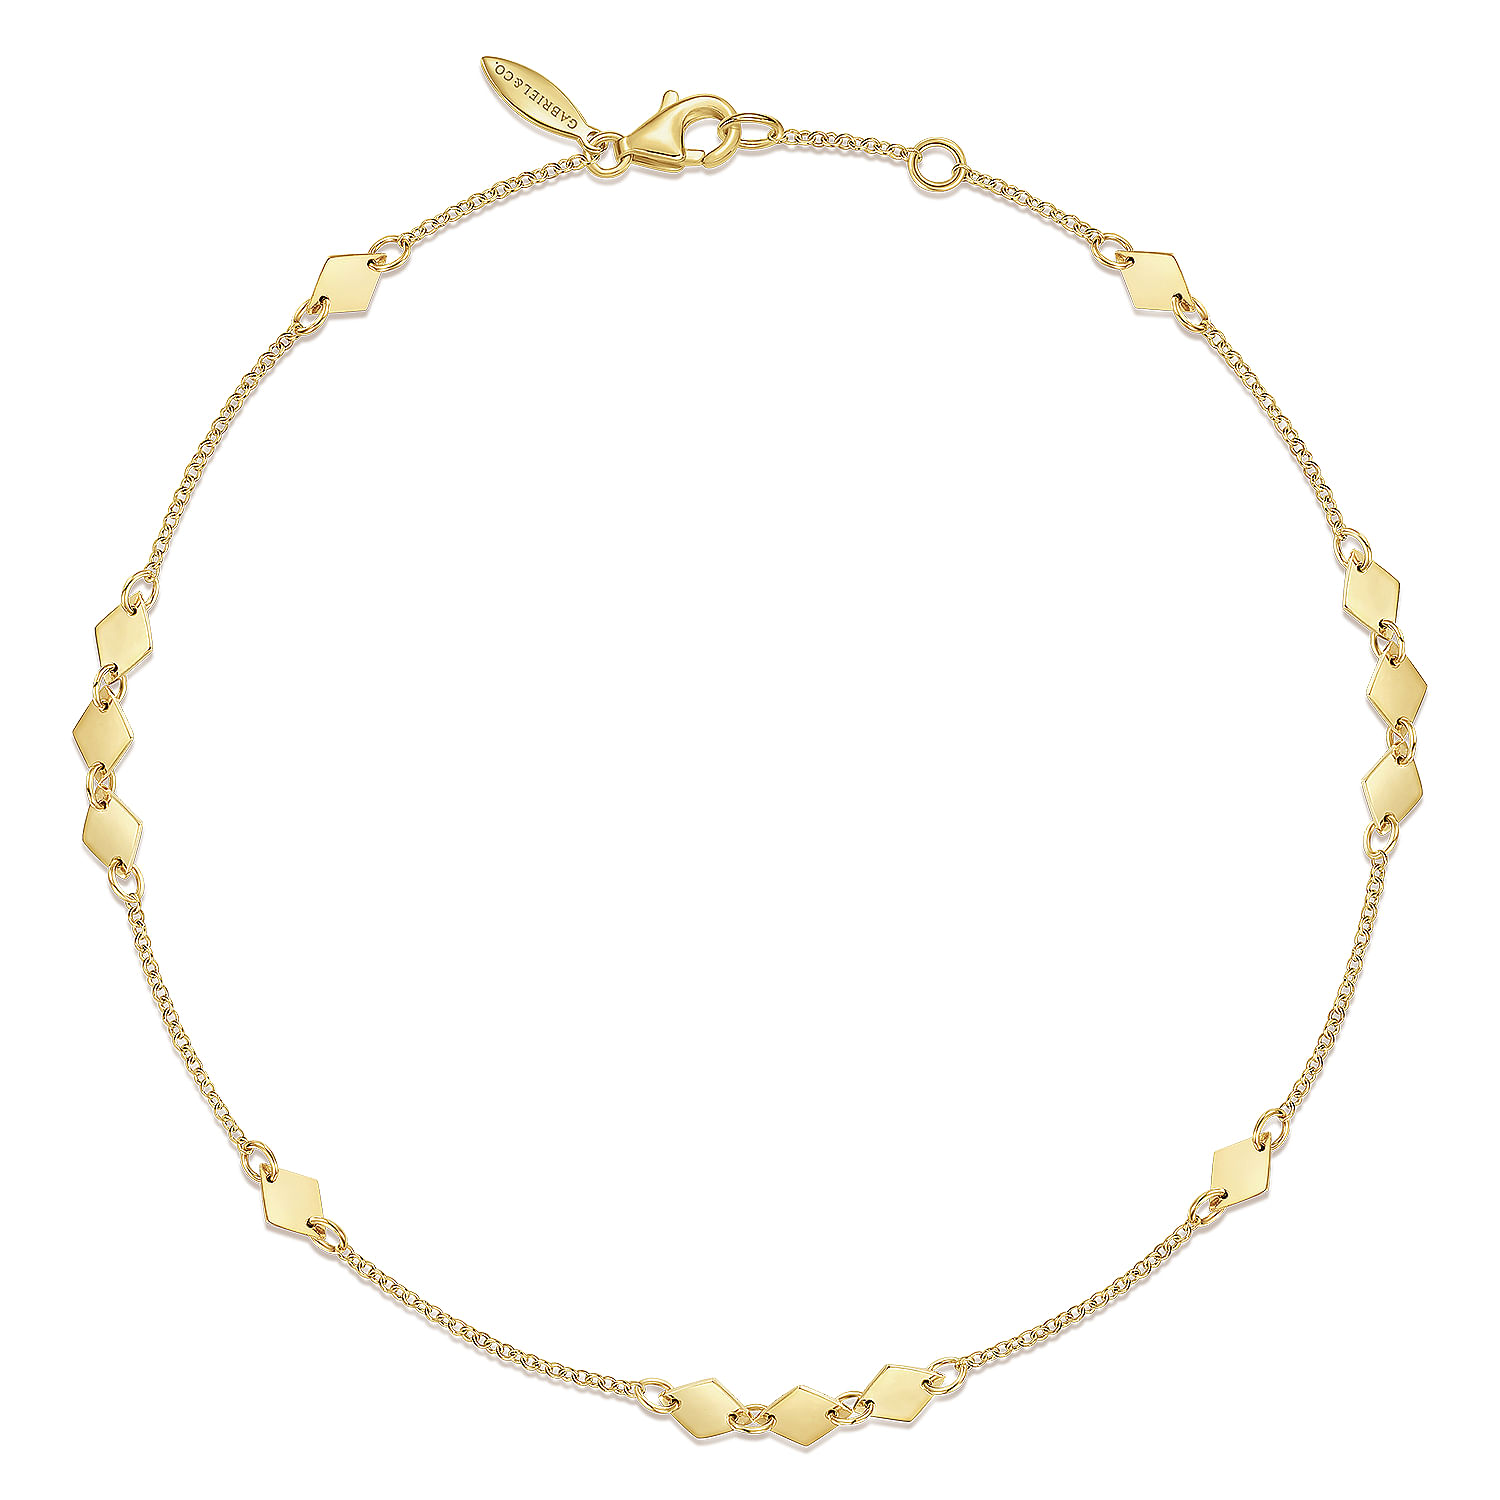 Gabriel - 14K Yellow Gold Chain Ankle Bracelet with Diamond Shaped Stations